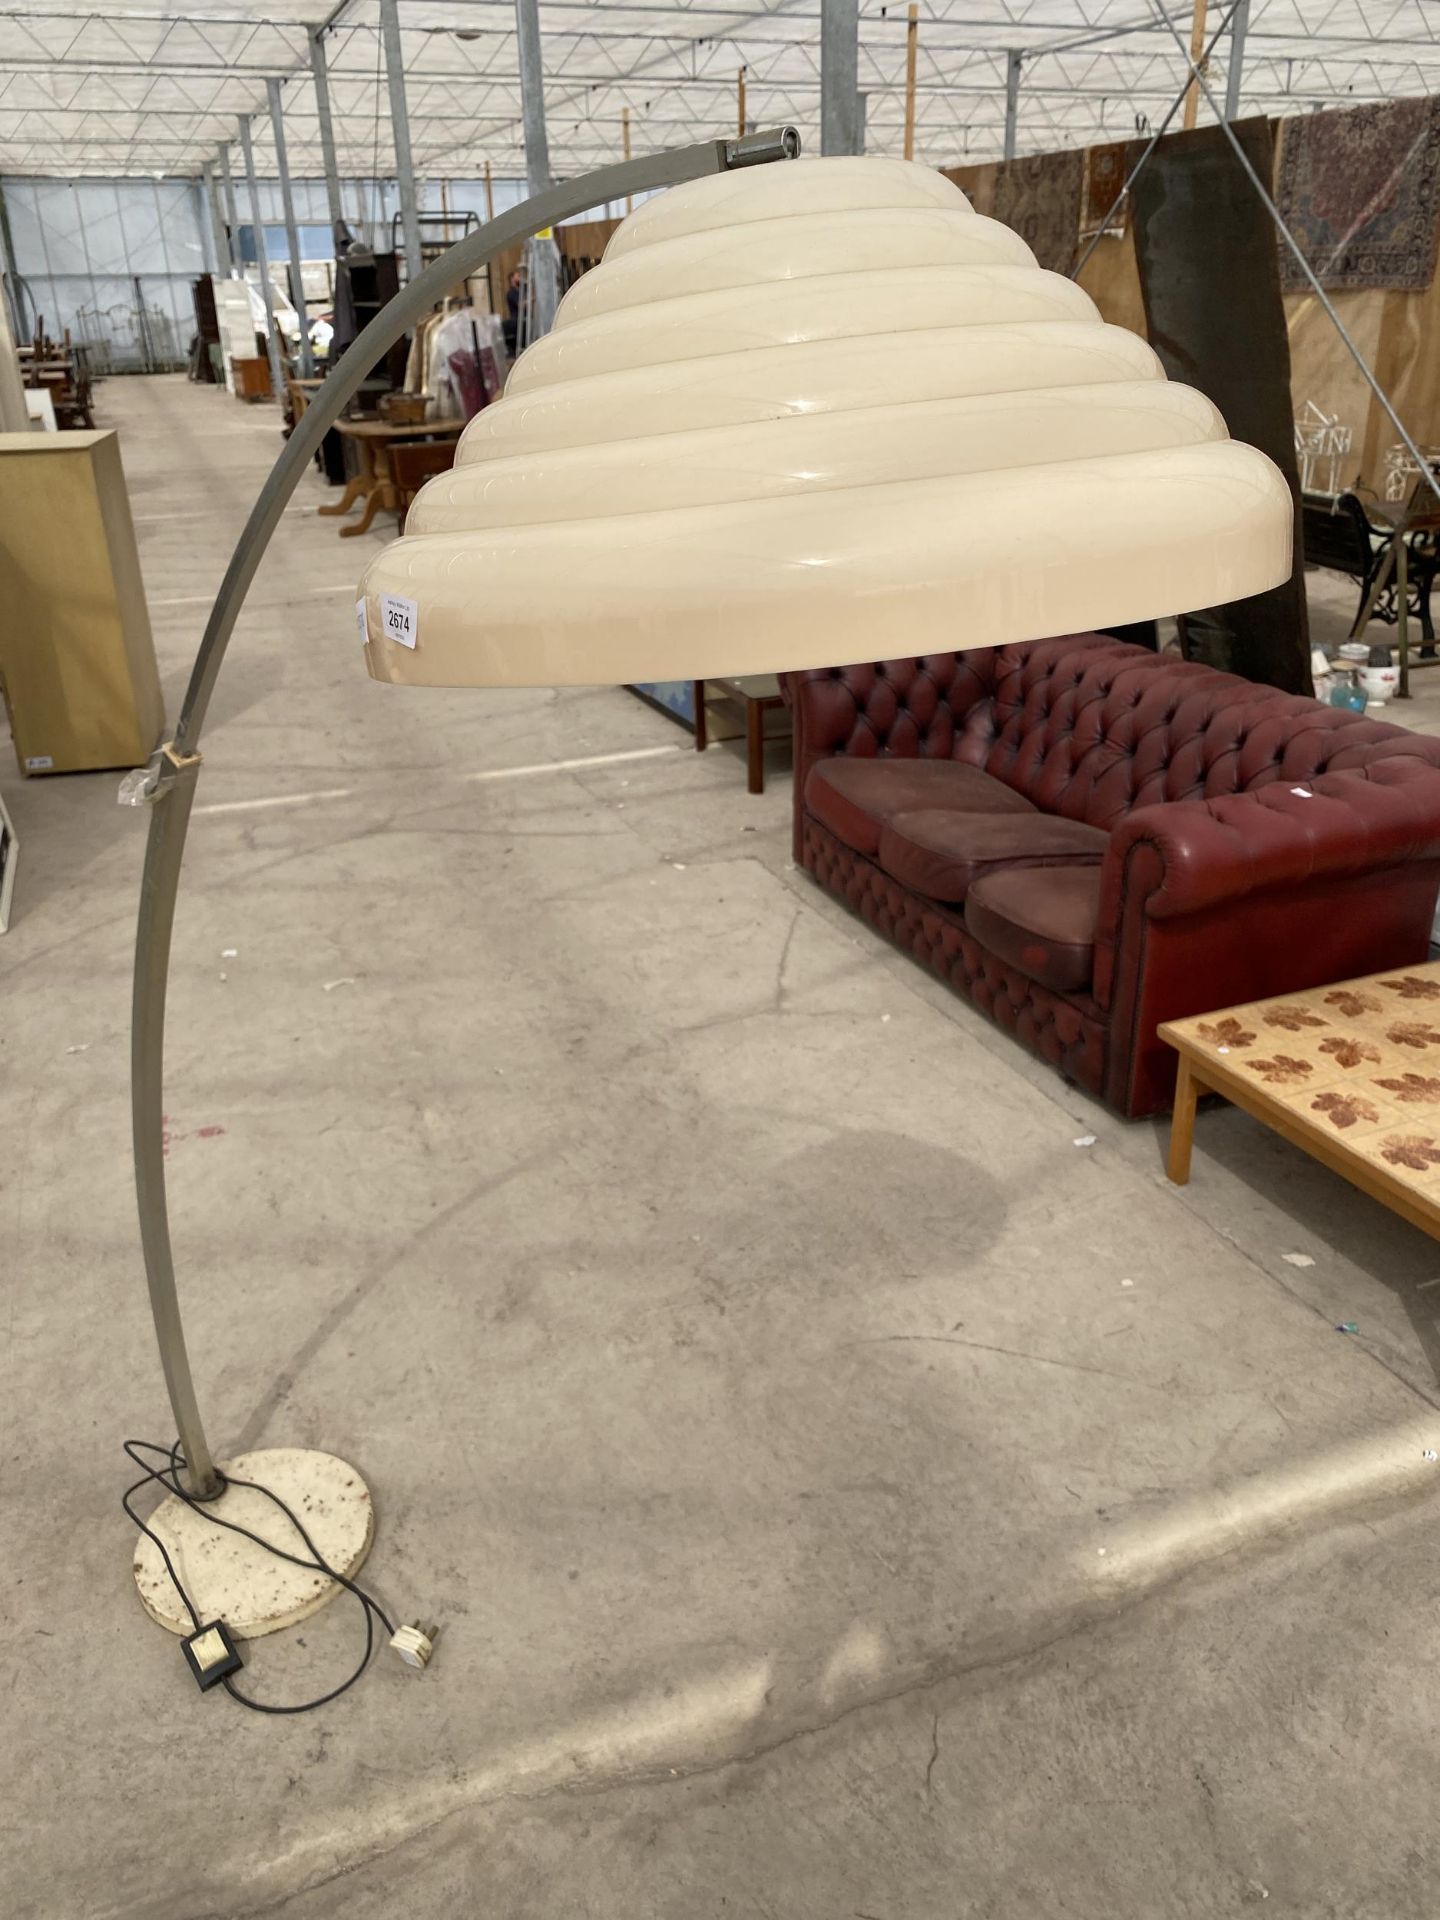 A RETRO ADJUSTABLE FLOOR LAMP ON CAST METAL BASE COMPLETE WITH 19.5" DIAMETER PLASTIC SHADE - Image 2 of 5